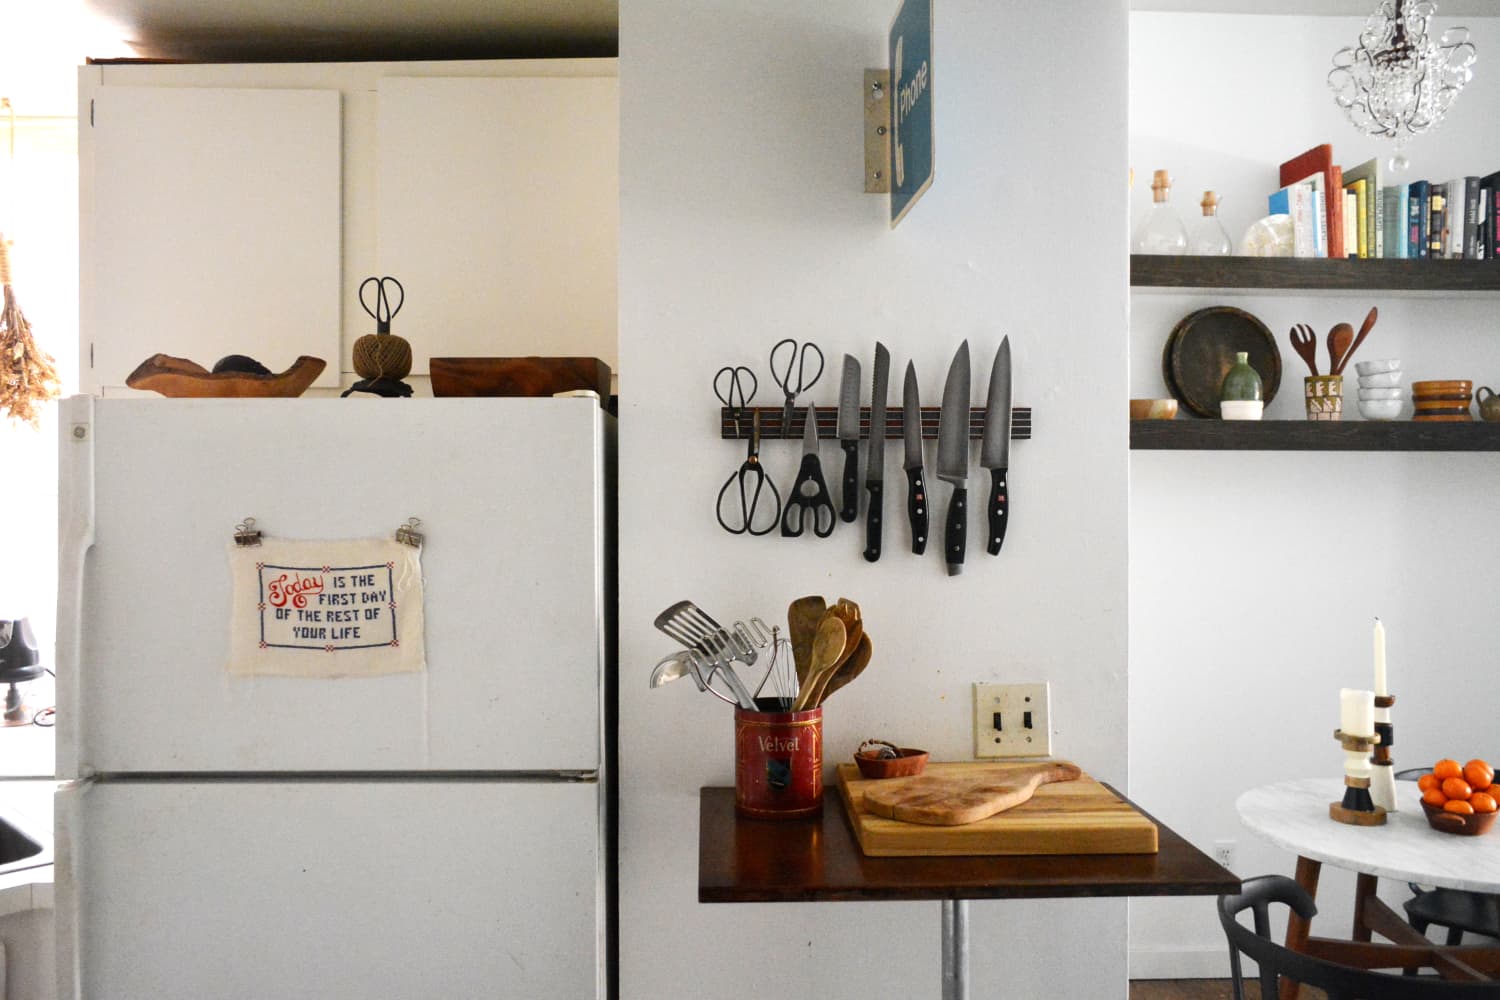 Tiny Kitchen Cooking, a New Food Blog Cooking Out of Tiny 250sqft